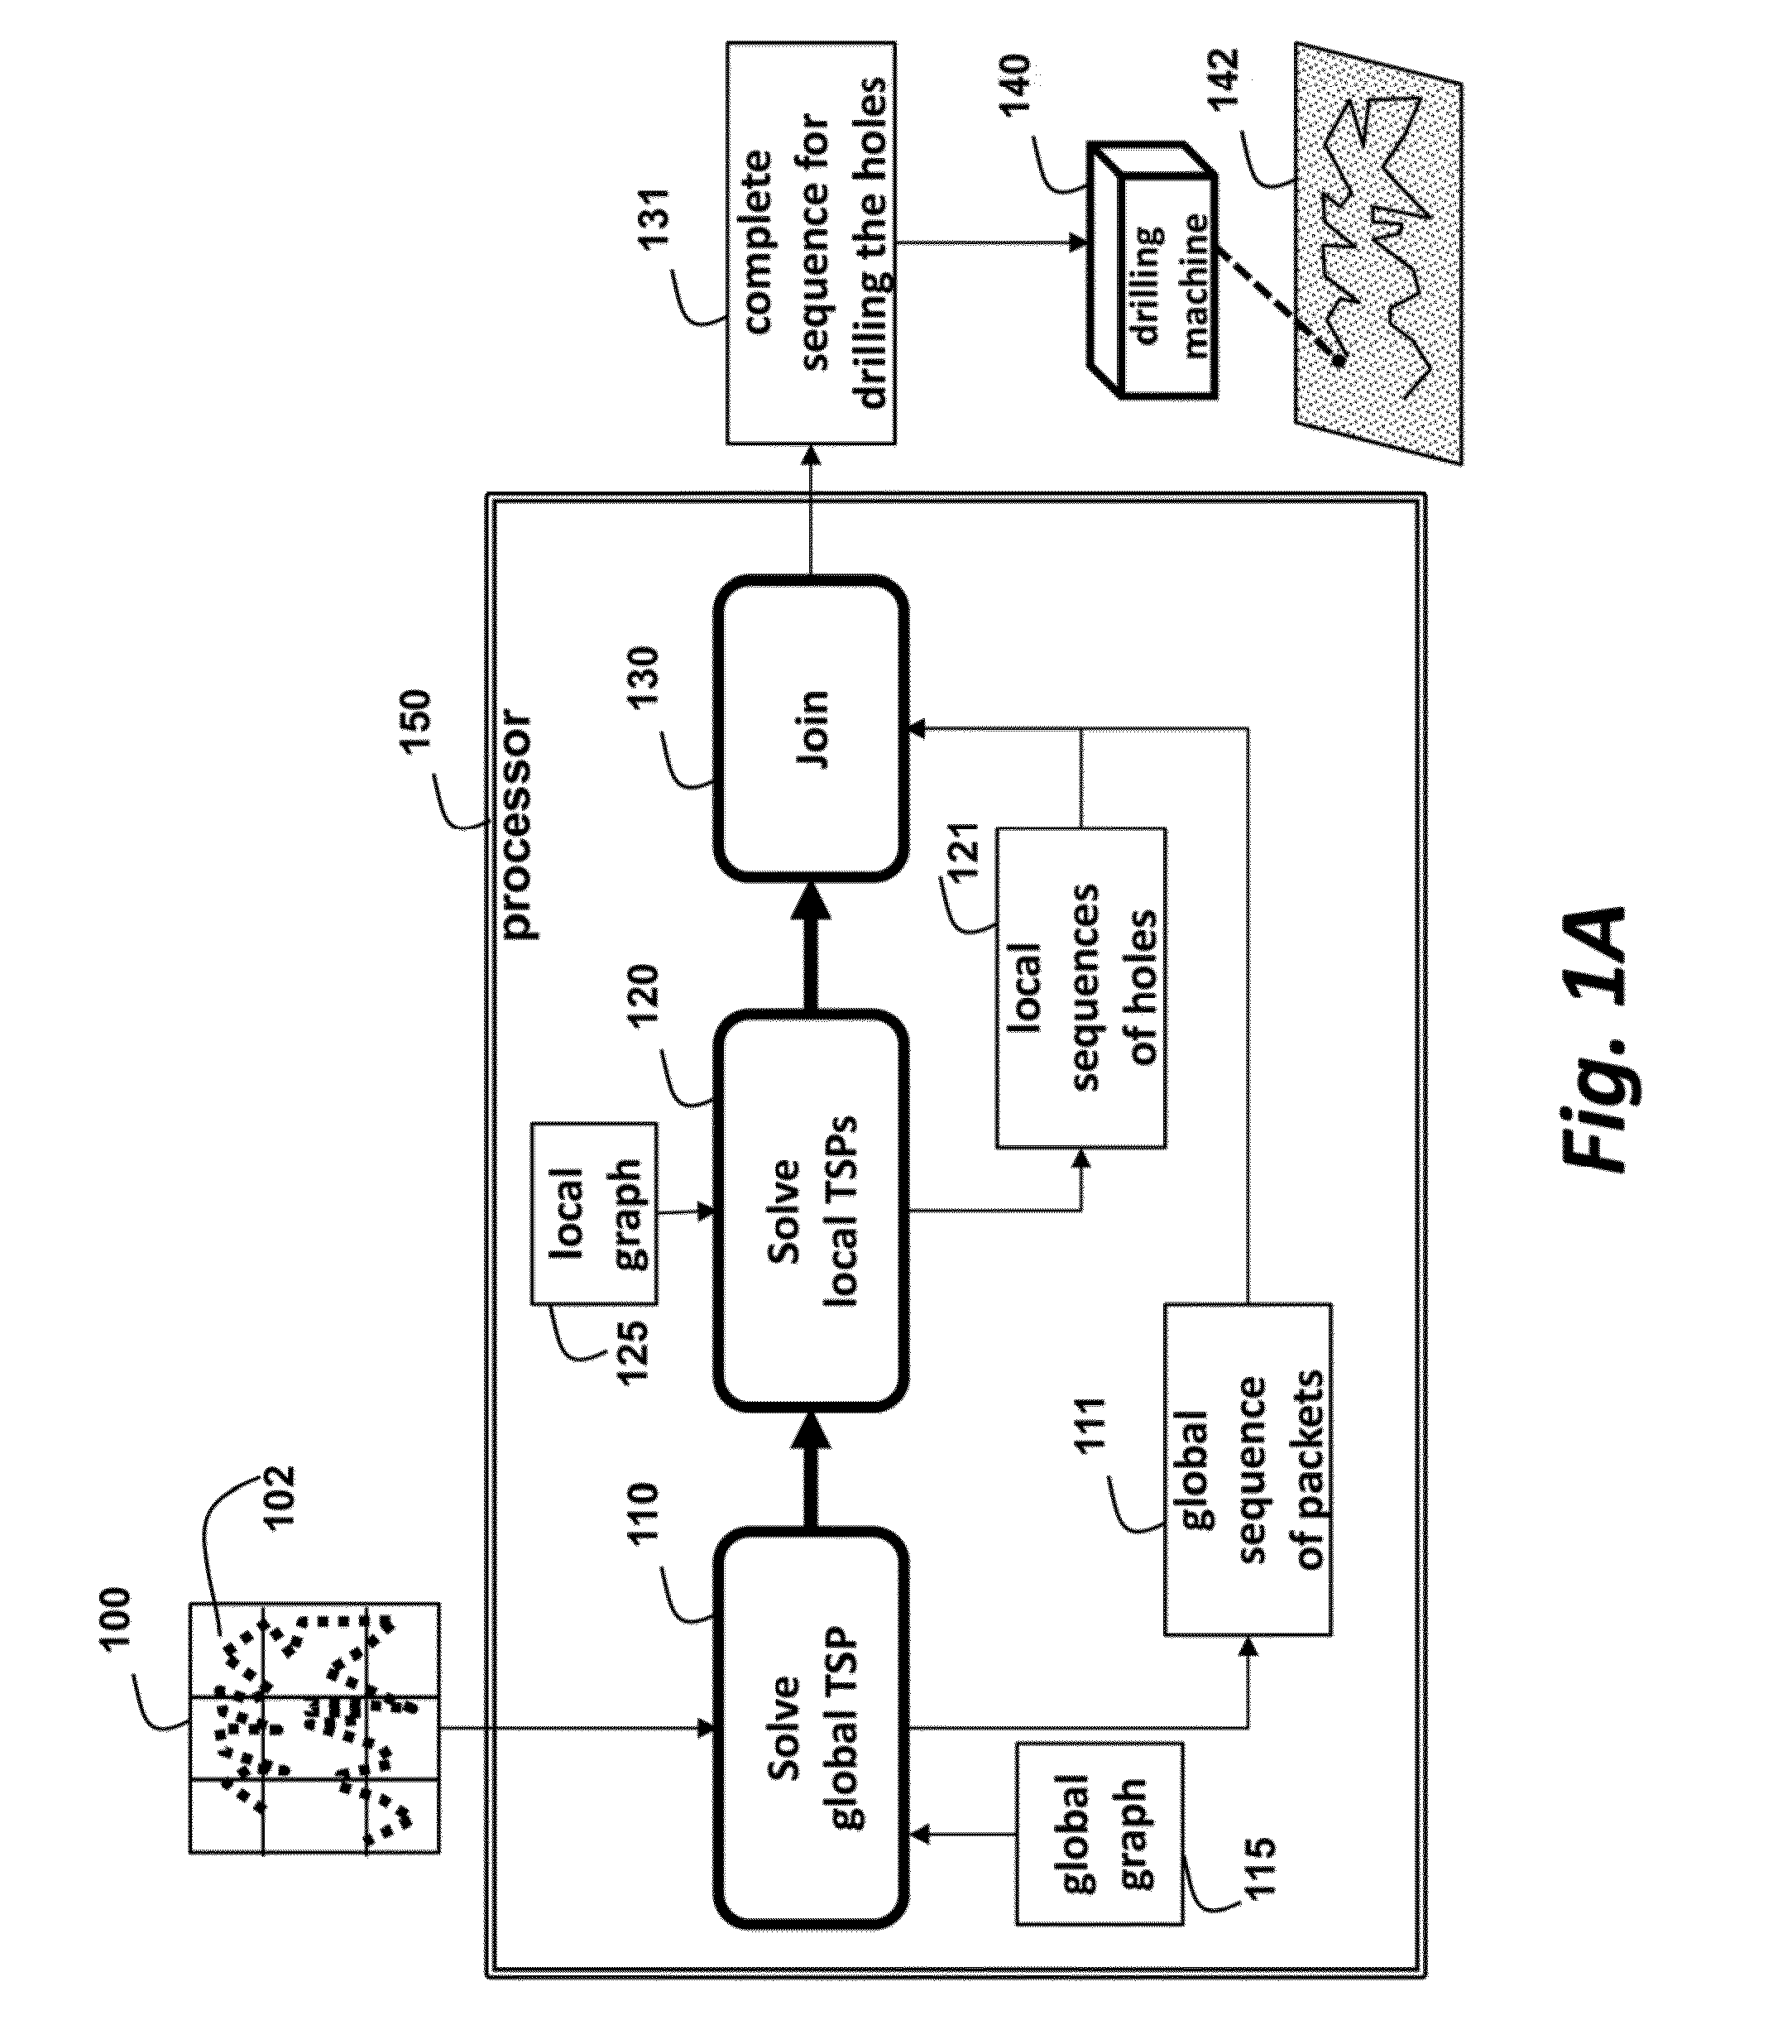 Method for Determining a Sequence for Drilling Holes According to a Pattern using Global and Local Optimization